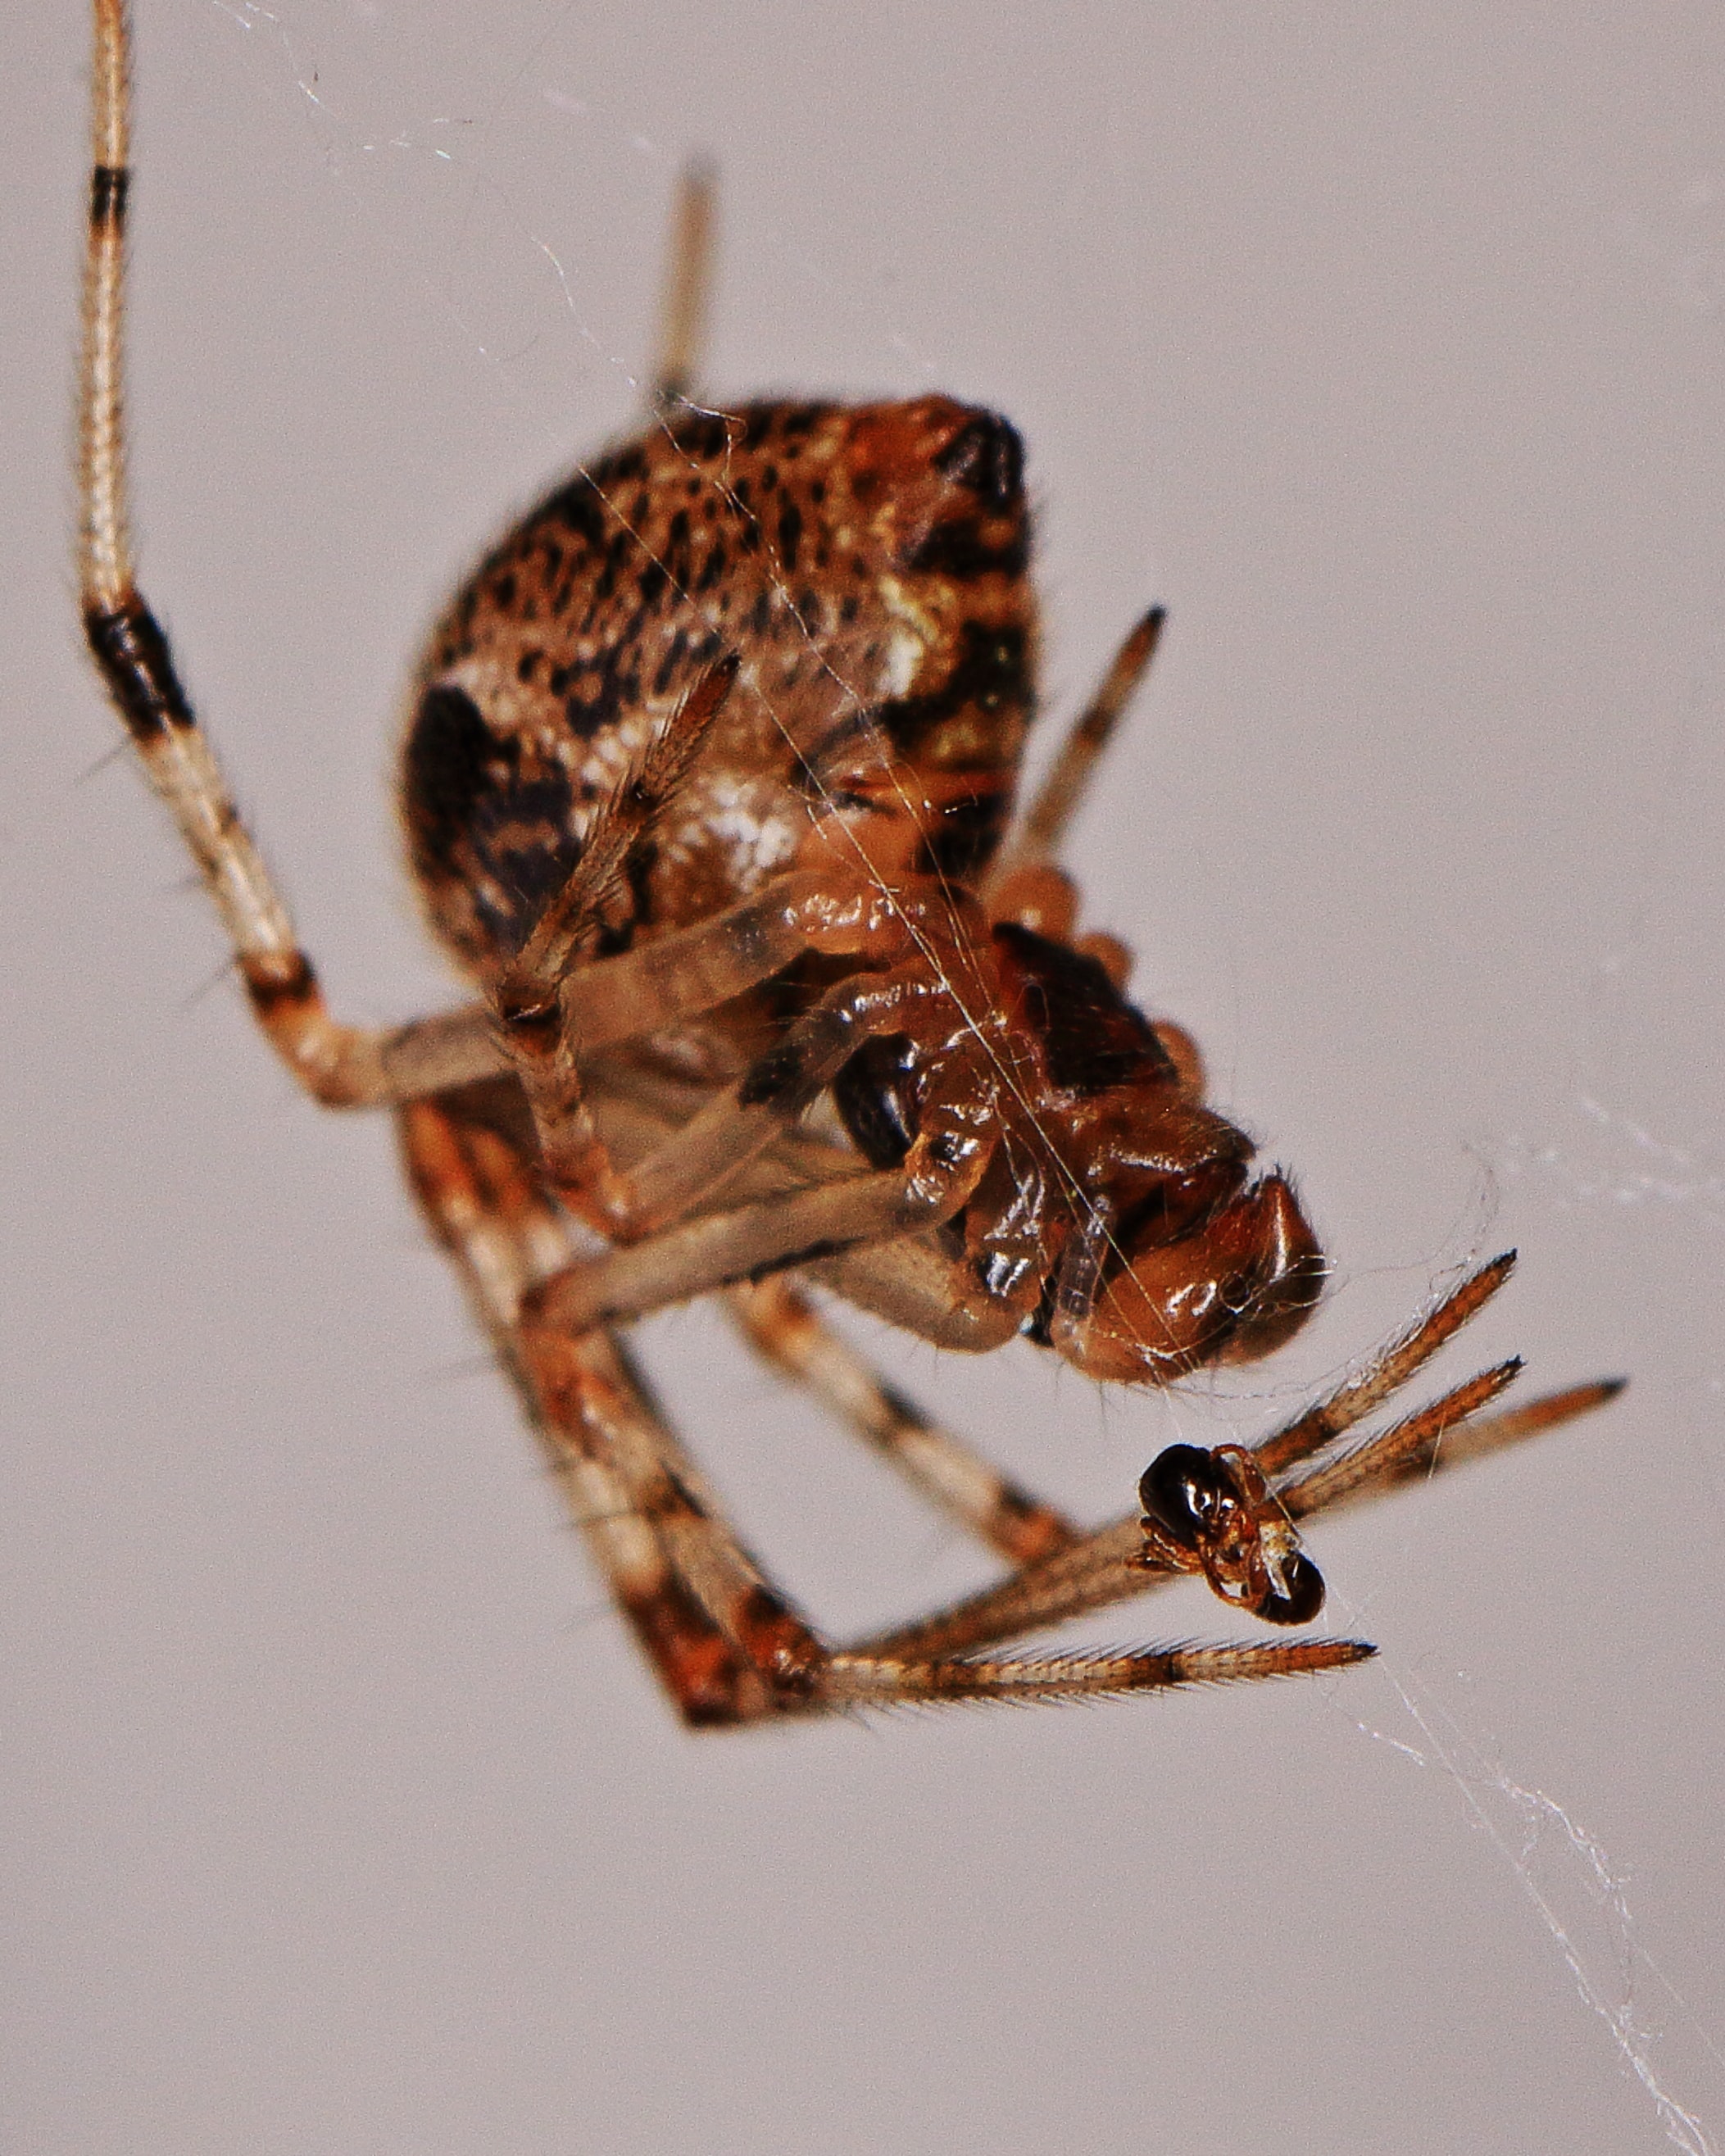 Picture of Parasteatoda tepidariorum (Common House Spider) - Male - Lateral,Webs,Prey